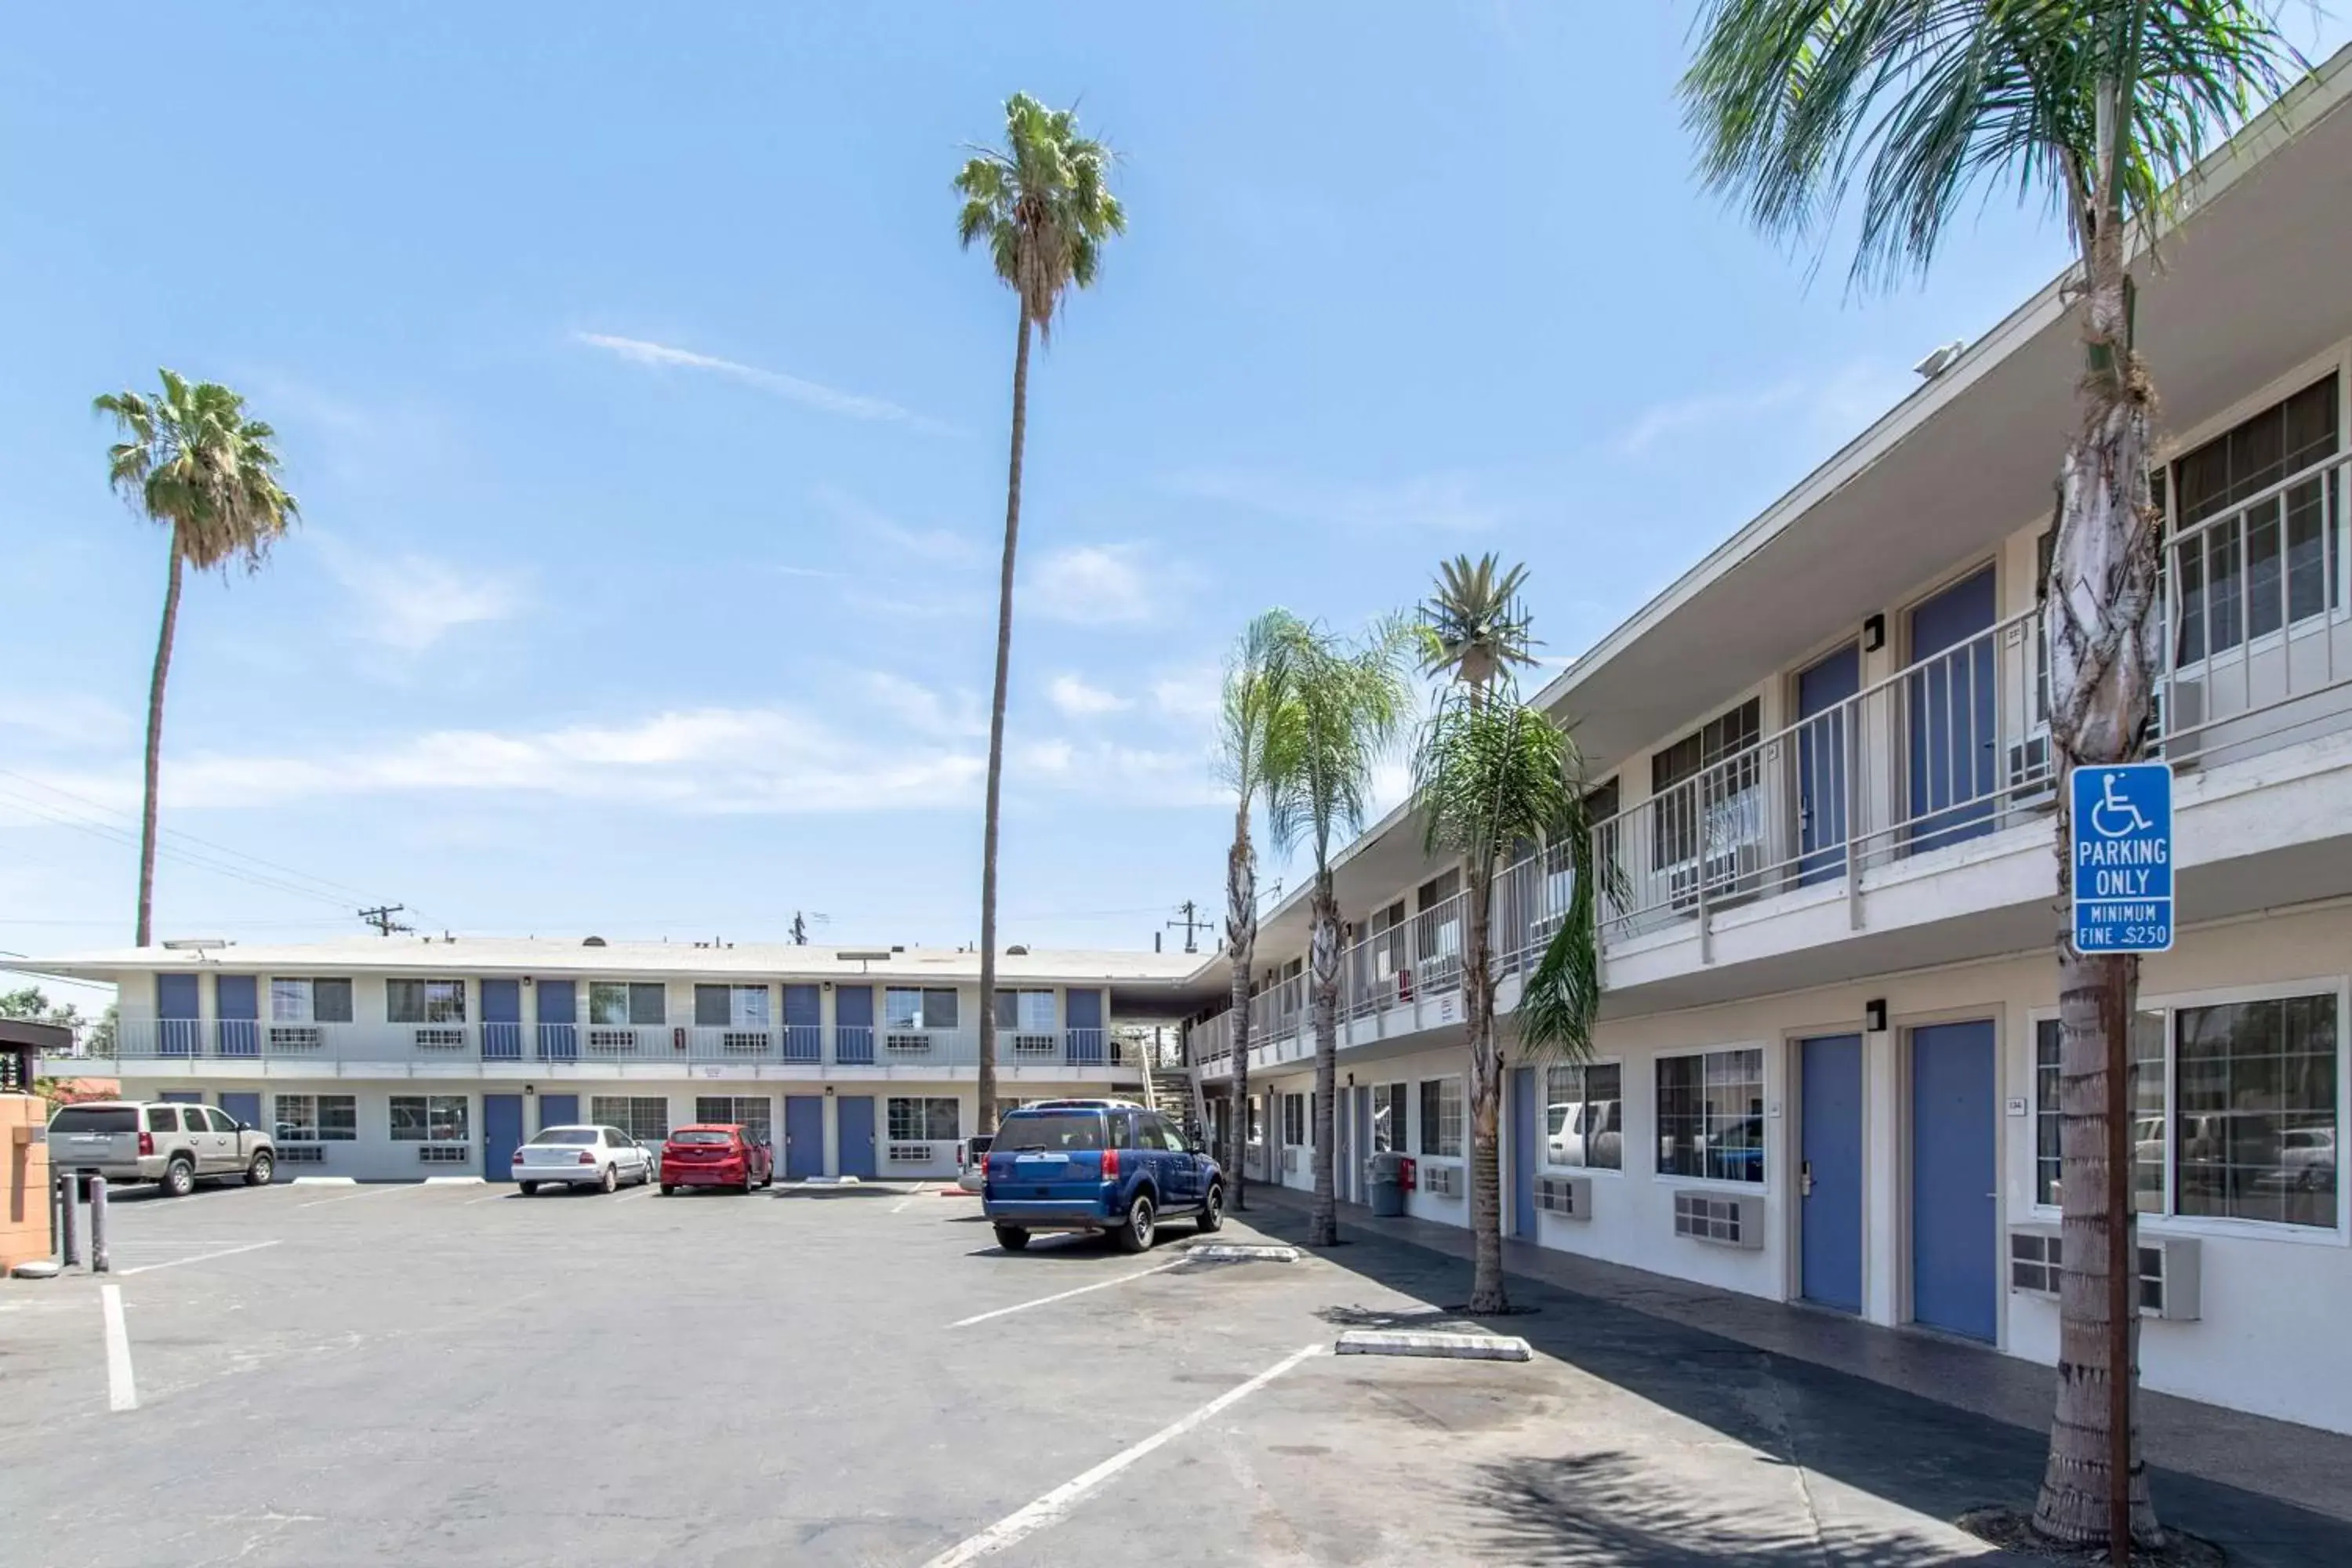 Property building in Motel 6 Bakersfield, CA - Central